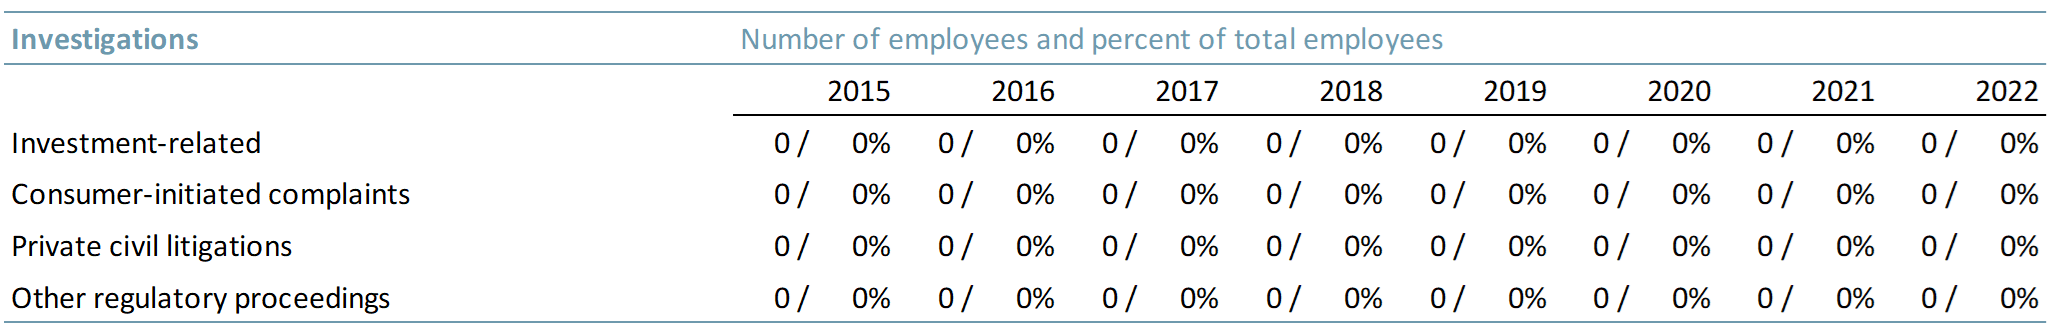 Number and percent of employees with a record of investment-related investigations